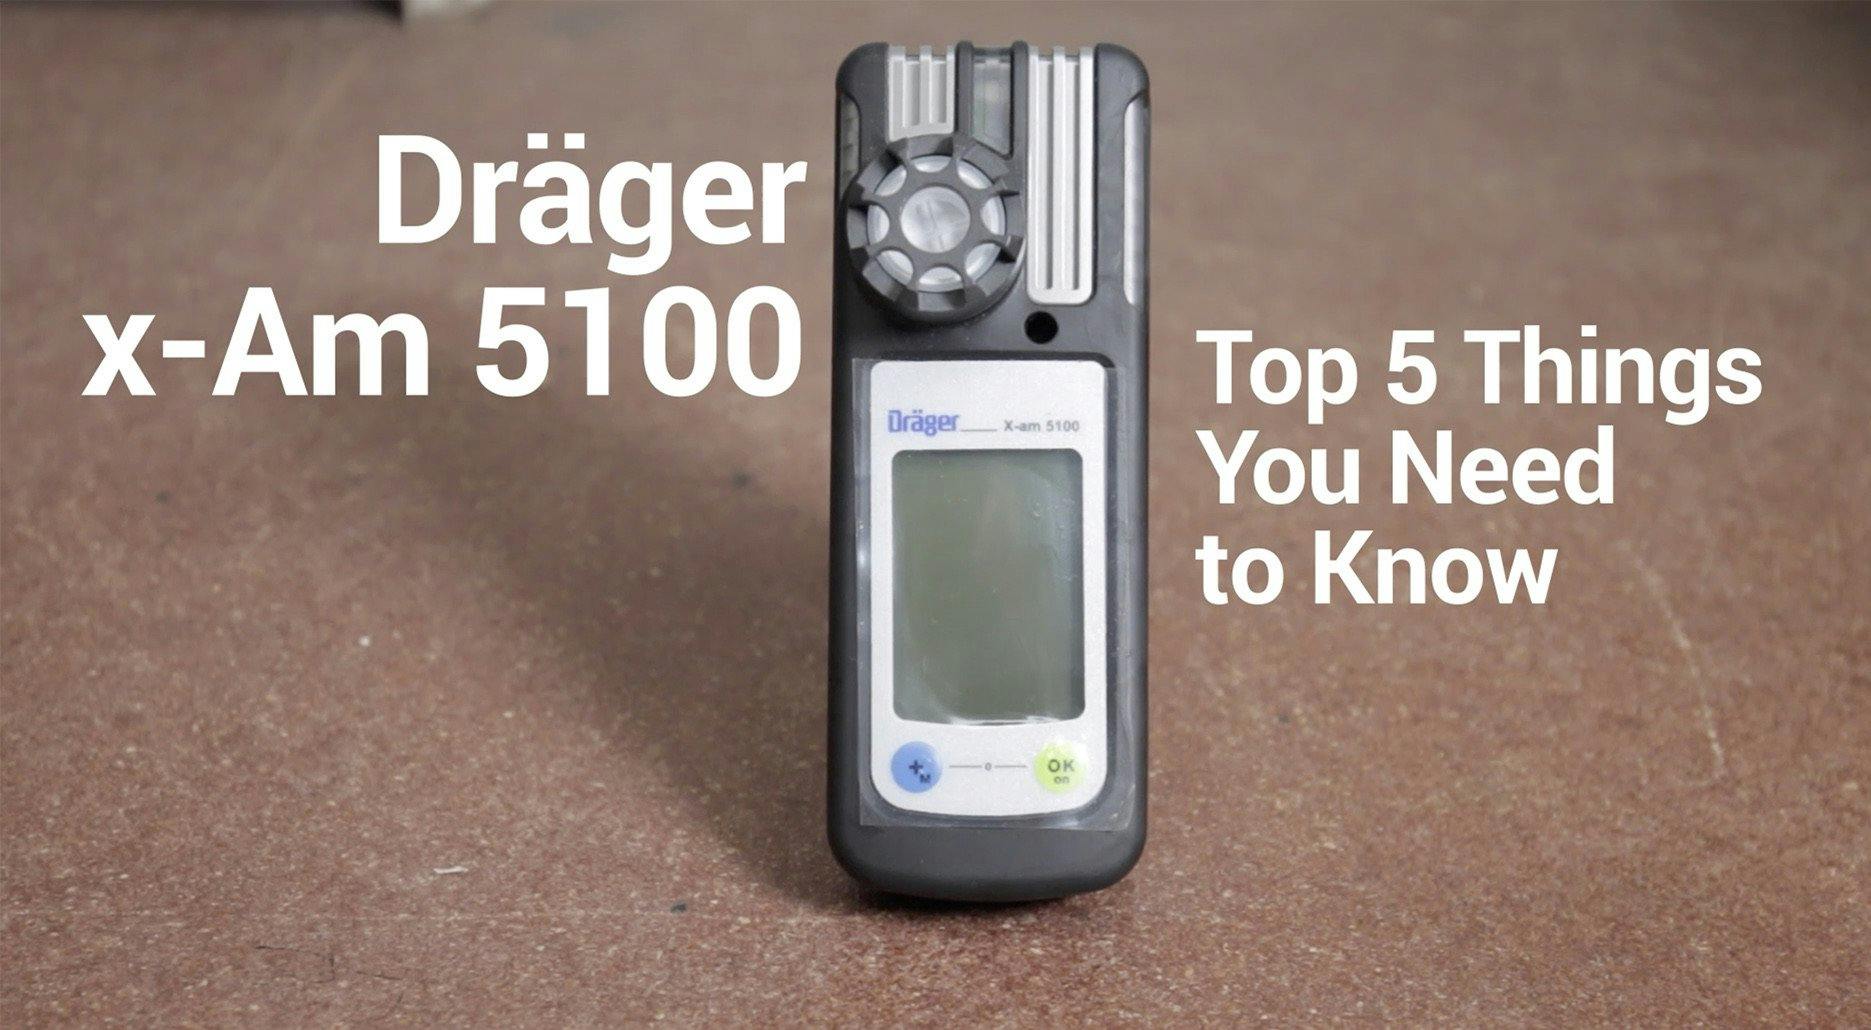 Dräger X-am 5100 Single Gas Detector - Top 5 Things You Need to Know